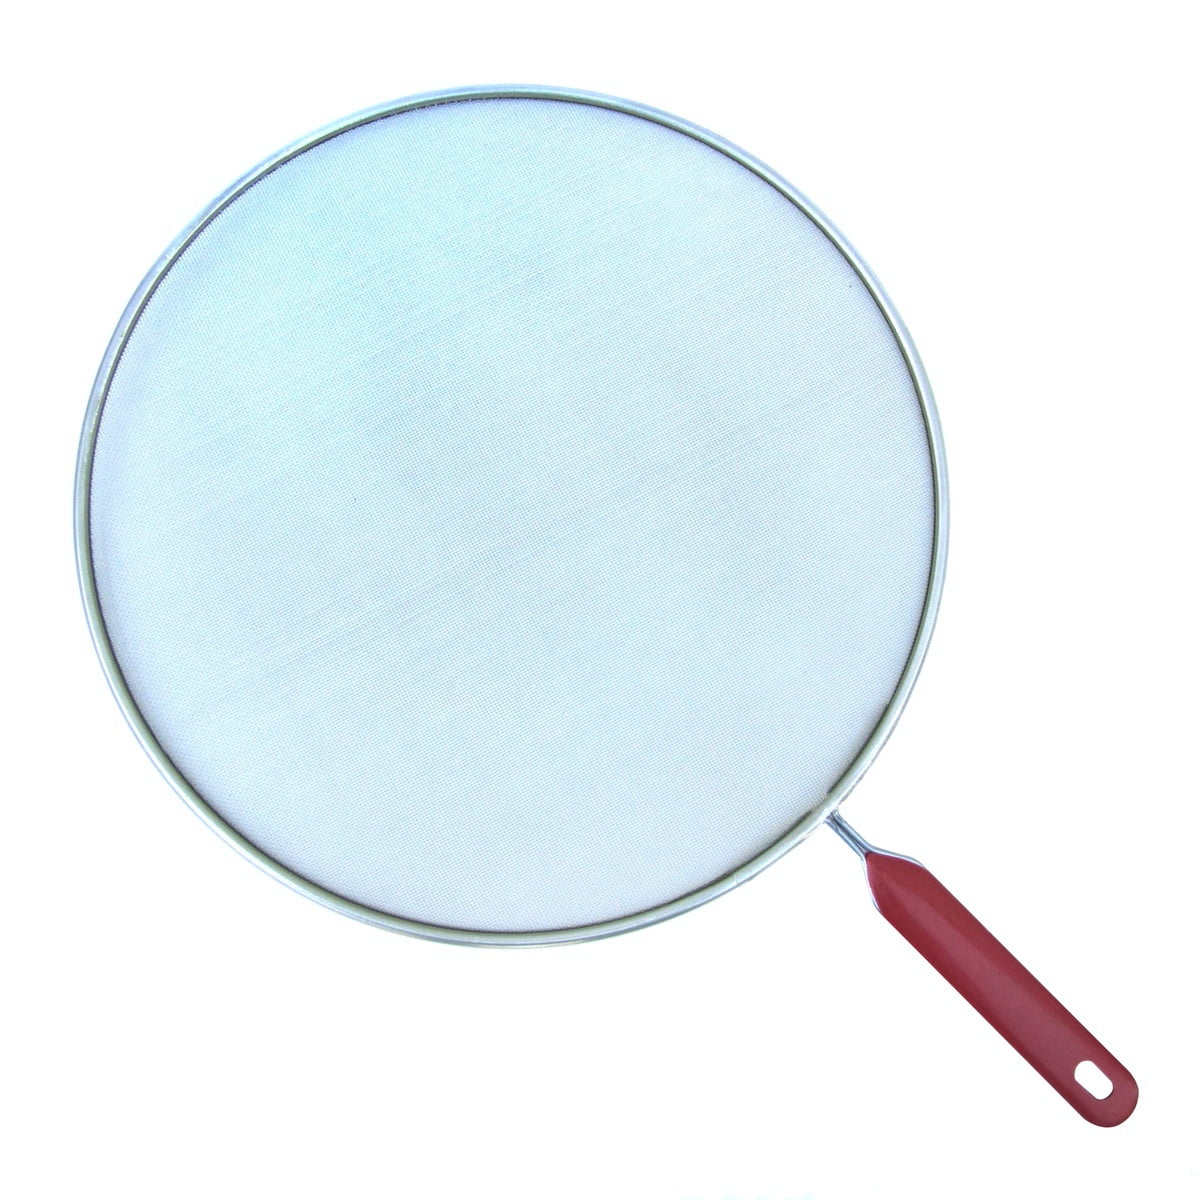 Oil Guard Anti Oil Splash Cover Pan Screen For Frying Pans 13" Stainless Steel 